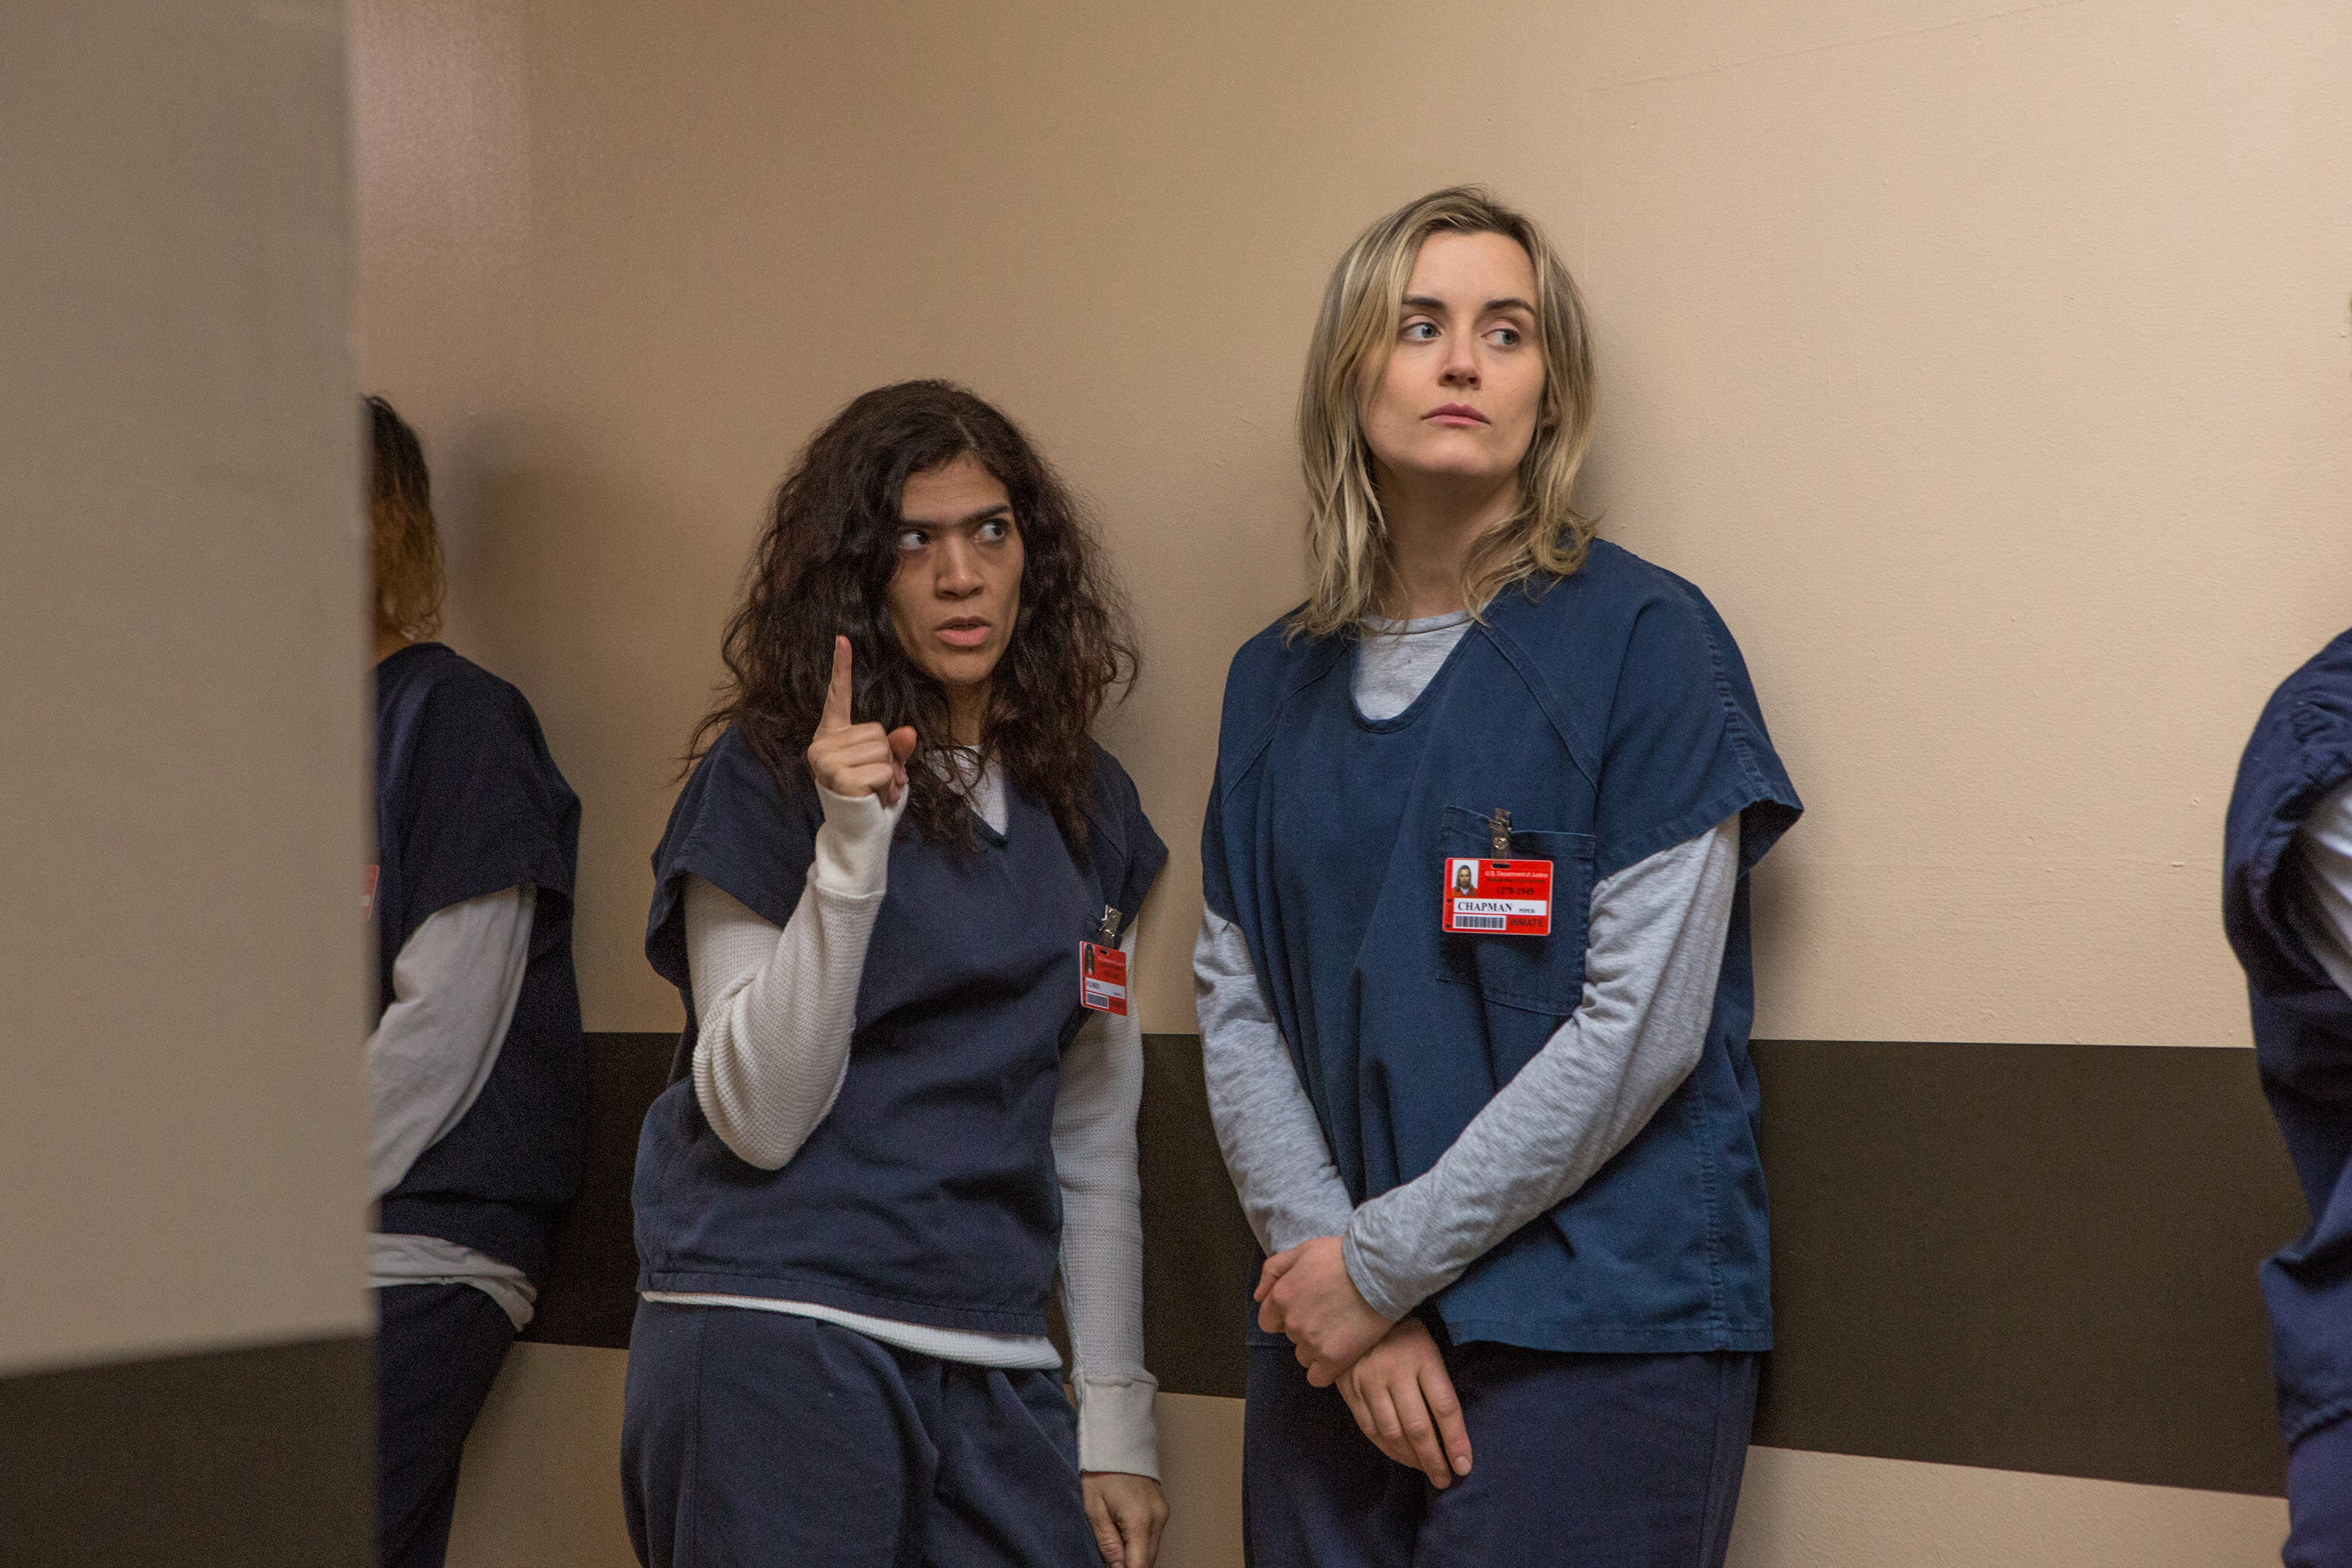 can you download orange is the new black on netflix